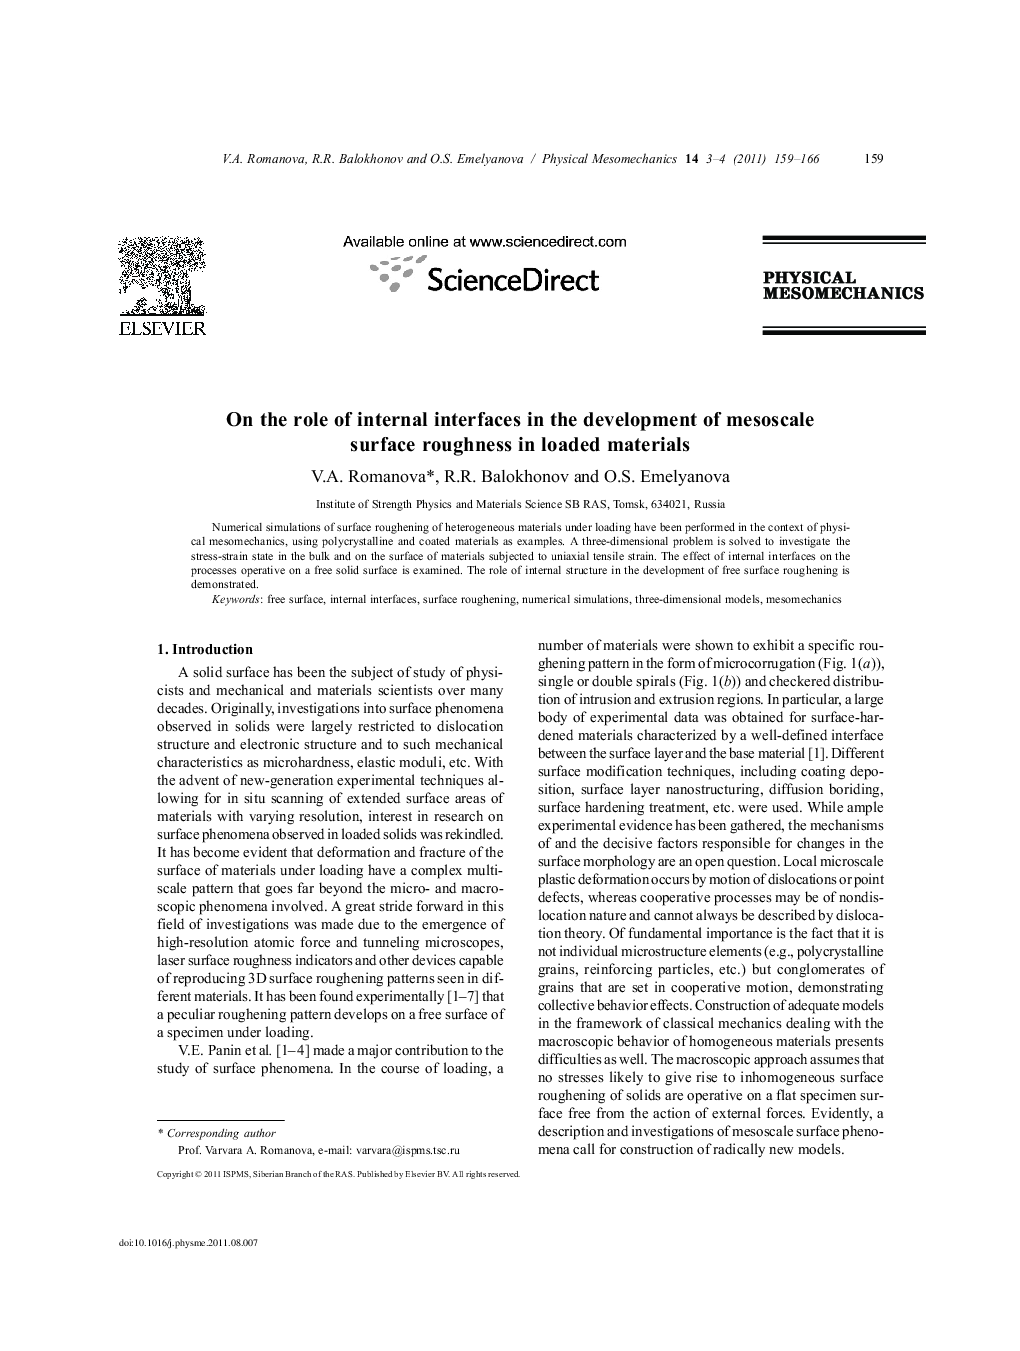 On the role of internal interfaces in the development of mesoscale surface roughness in loaded materials